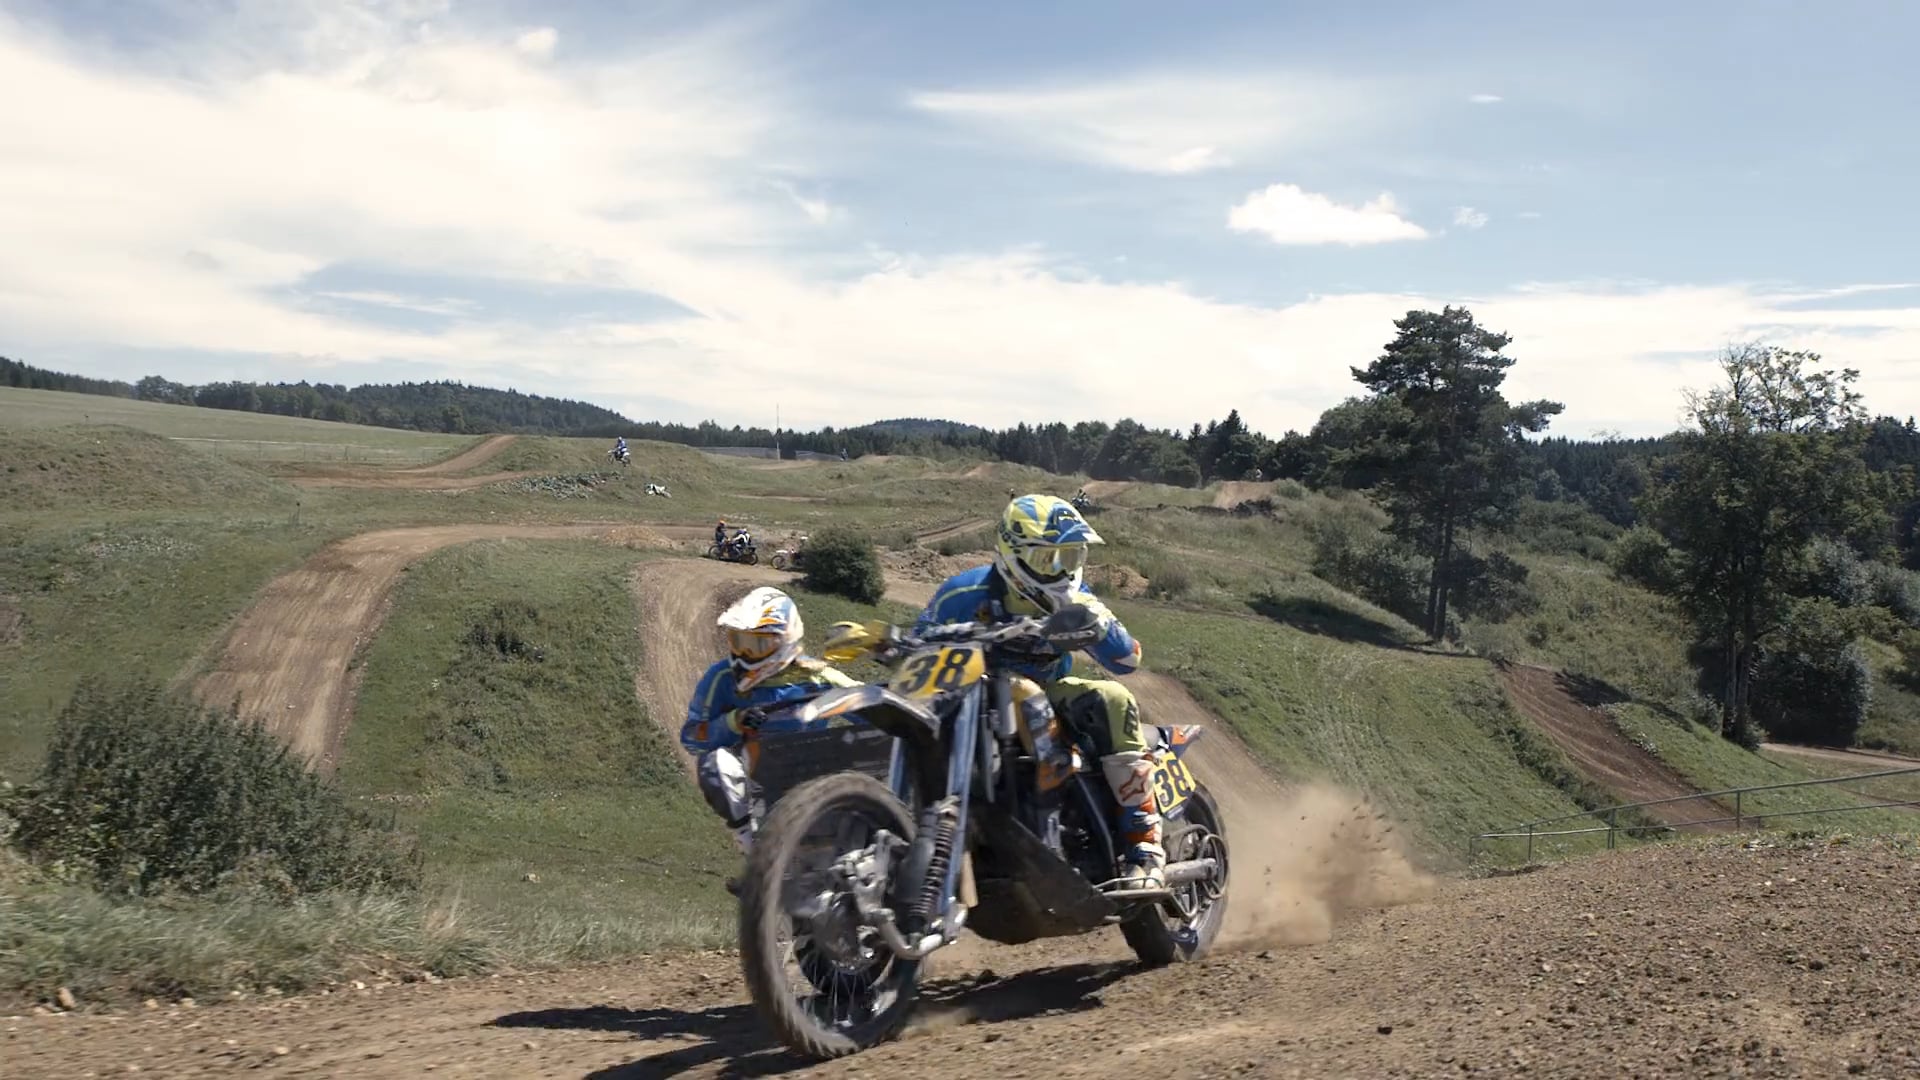 Moto Cross is Awesome - Trailer!